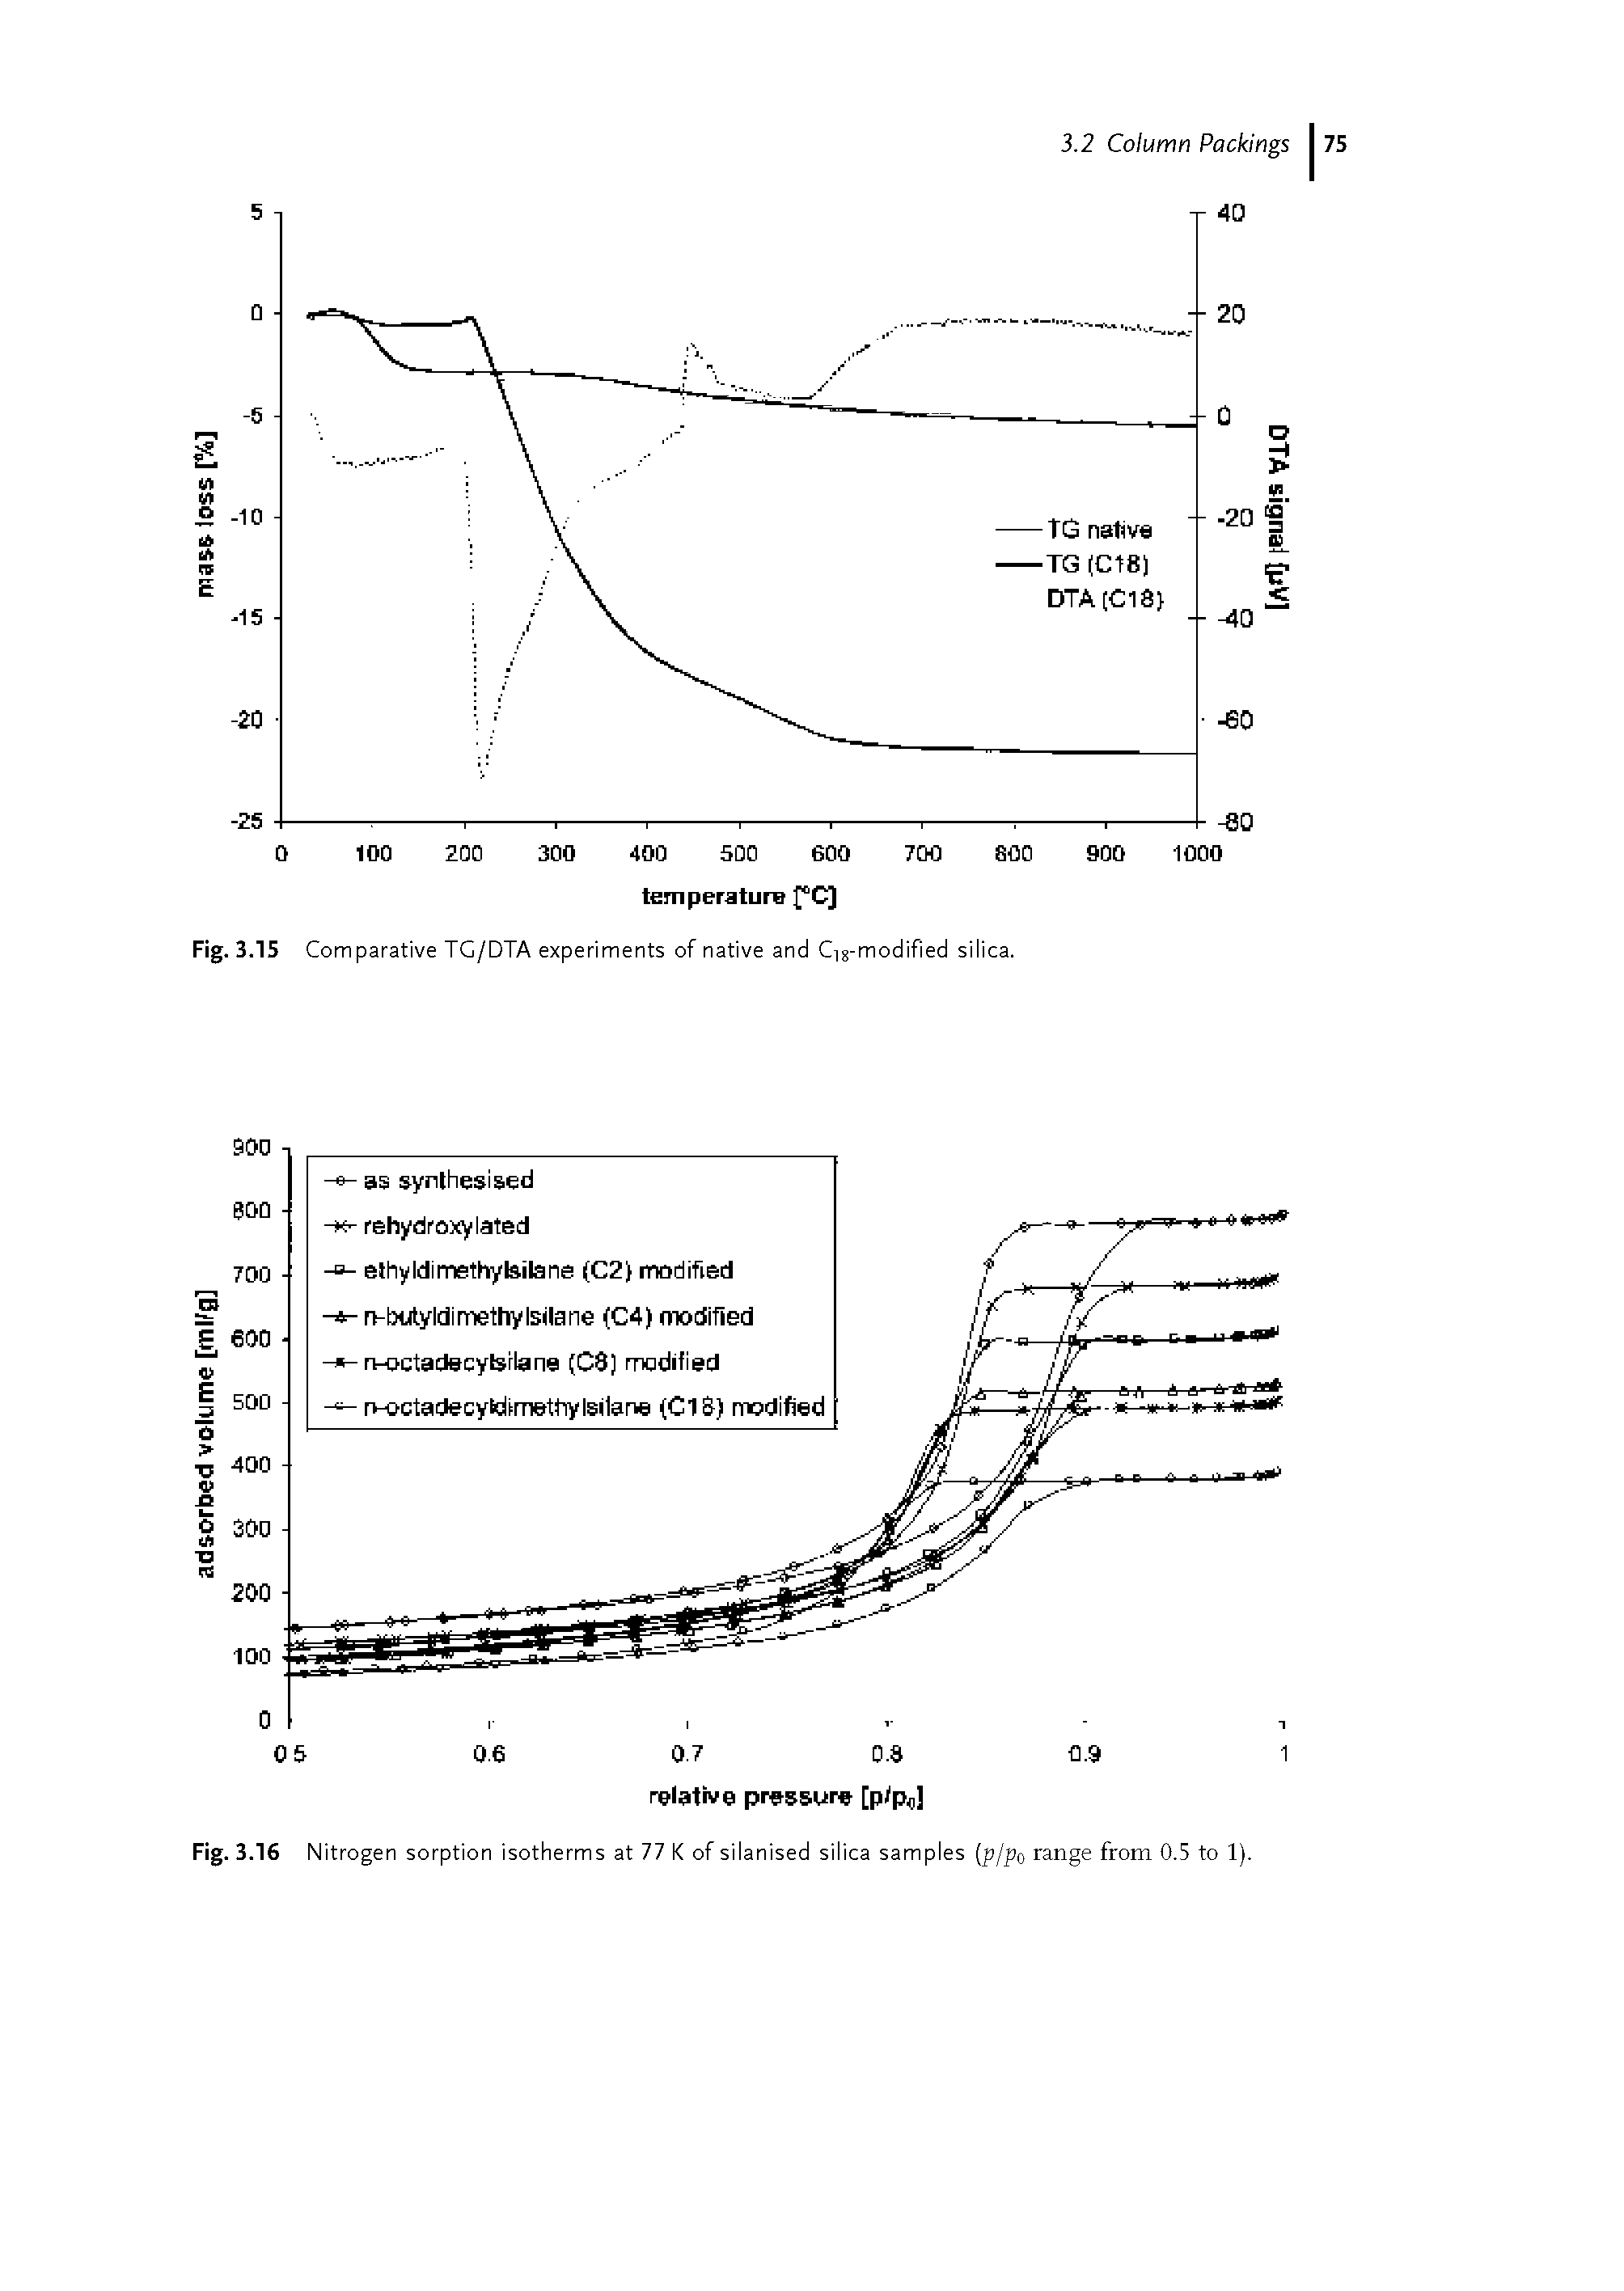 Fig. 3.16 Nitrogen sorption isotherms at 77 K of silanised silica samples (p/po range from 0.5 to 1).